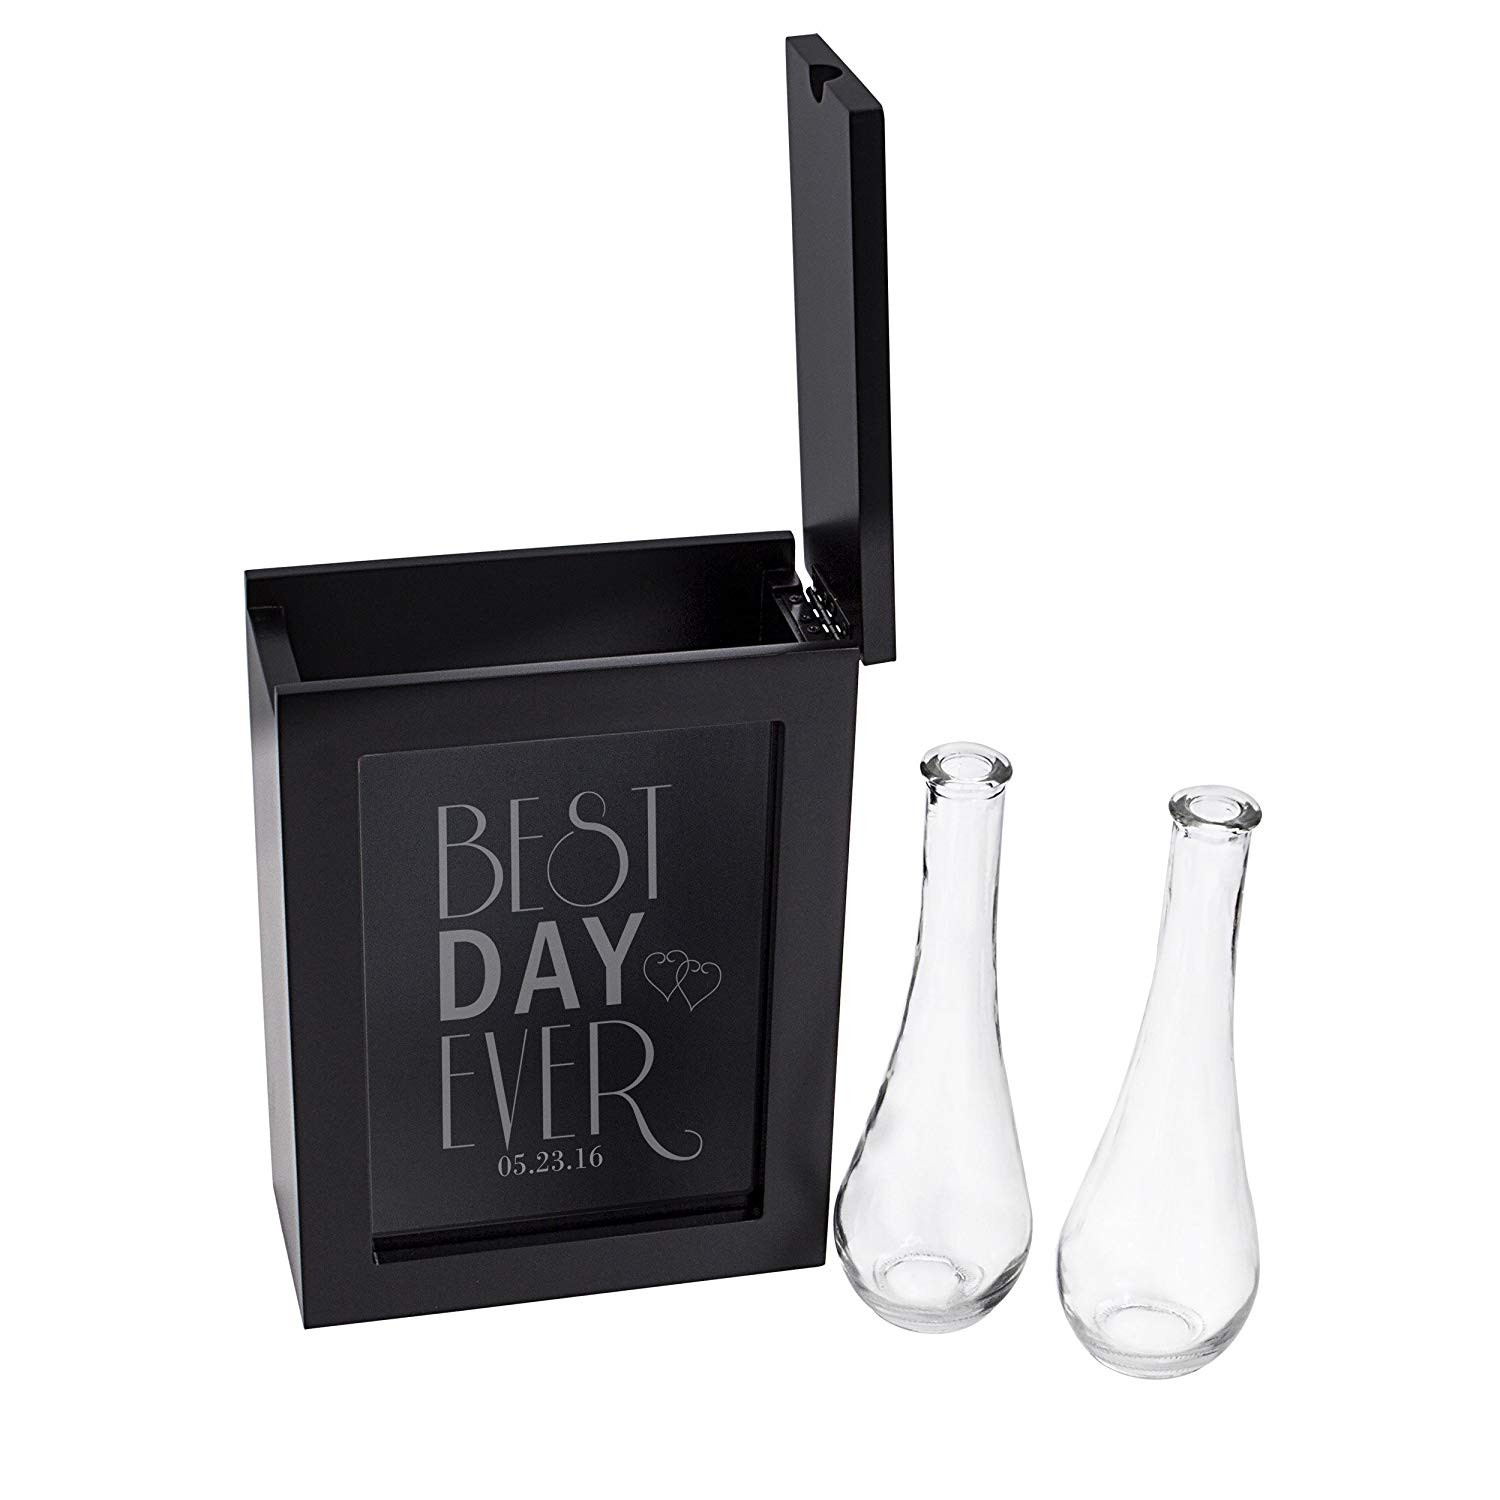 18 Lovable Sand Ceremony Heart Shaped Vase 2024 free download sand ceremony heart shaped vase of amazon com cathys concepts best day ever unity sand ceremony inside amazon com cathys concepts best day ever unity sand ceremony shadow box set black with 